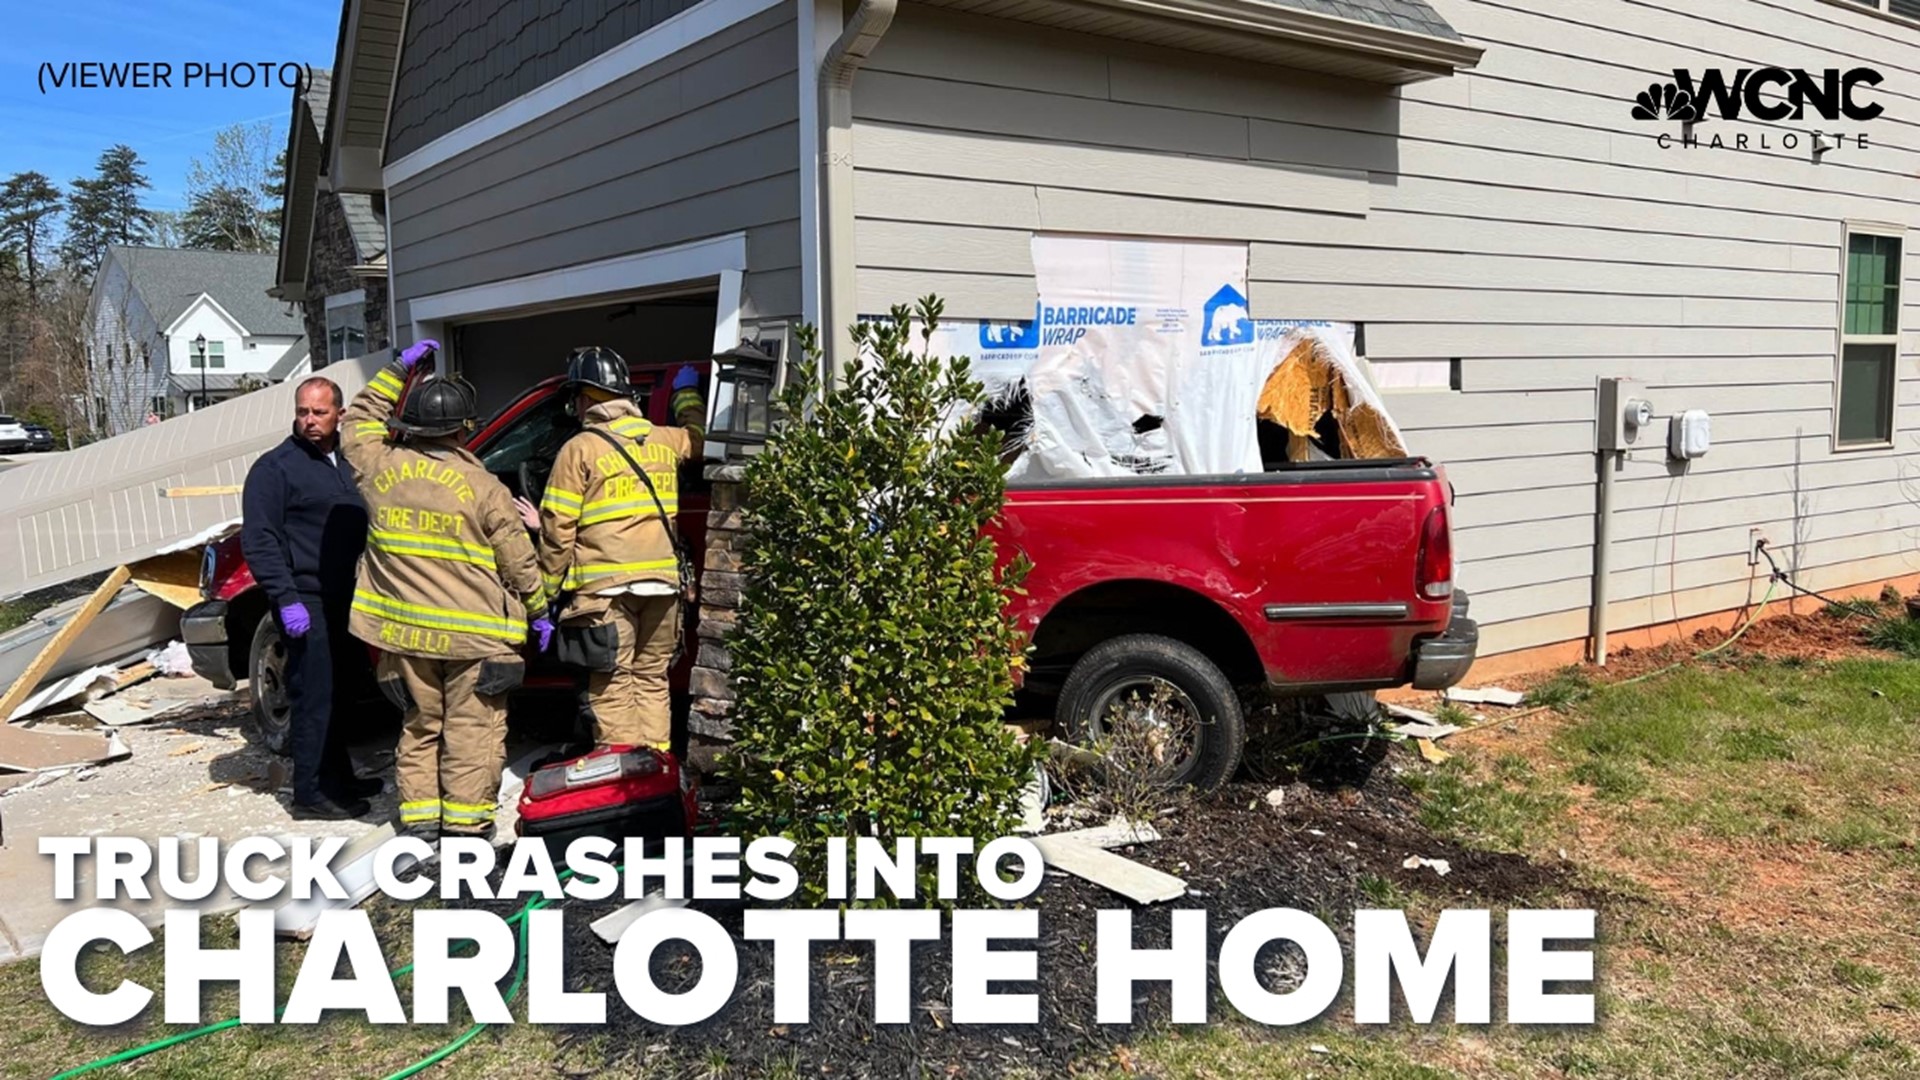 A birthday brunch was happening at the home when the truck crashed into the garage.